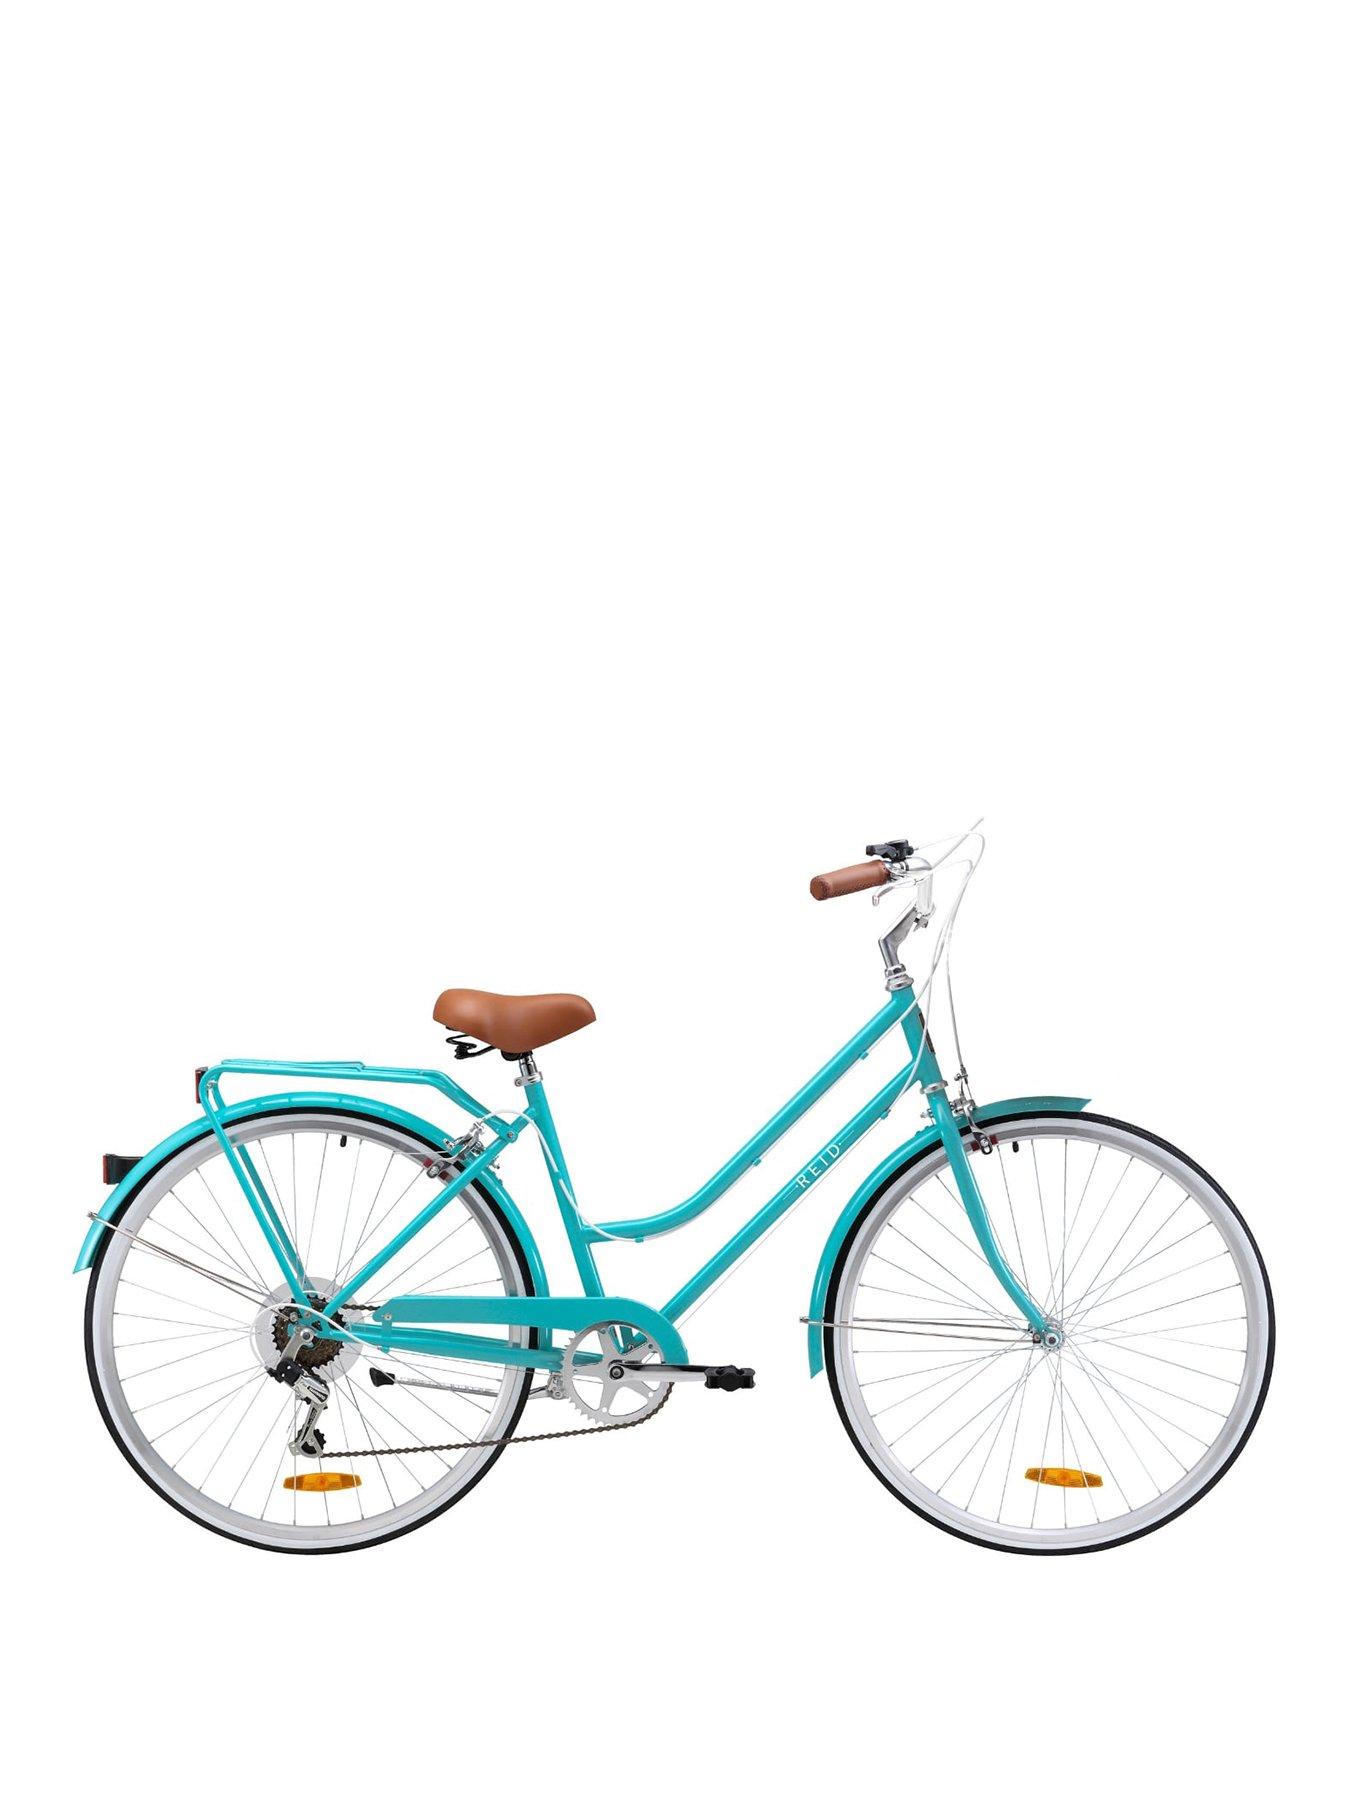 Elegant Design Combined with Gearing System on a Practical Step-Through Comfort Frame 6 Speed Shimano Bicycle Turquoise Gama Bikes City Avenue 700C 